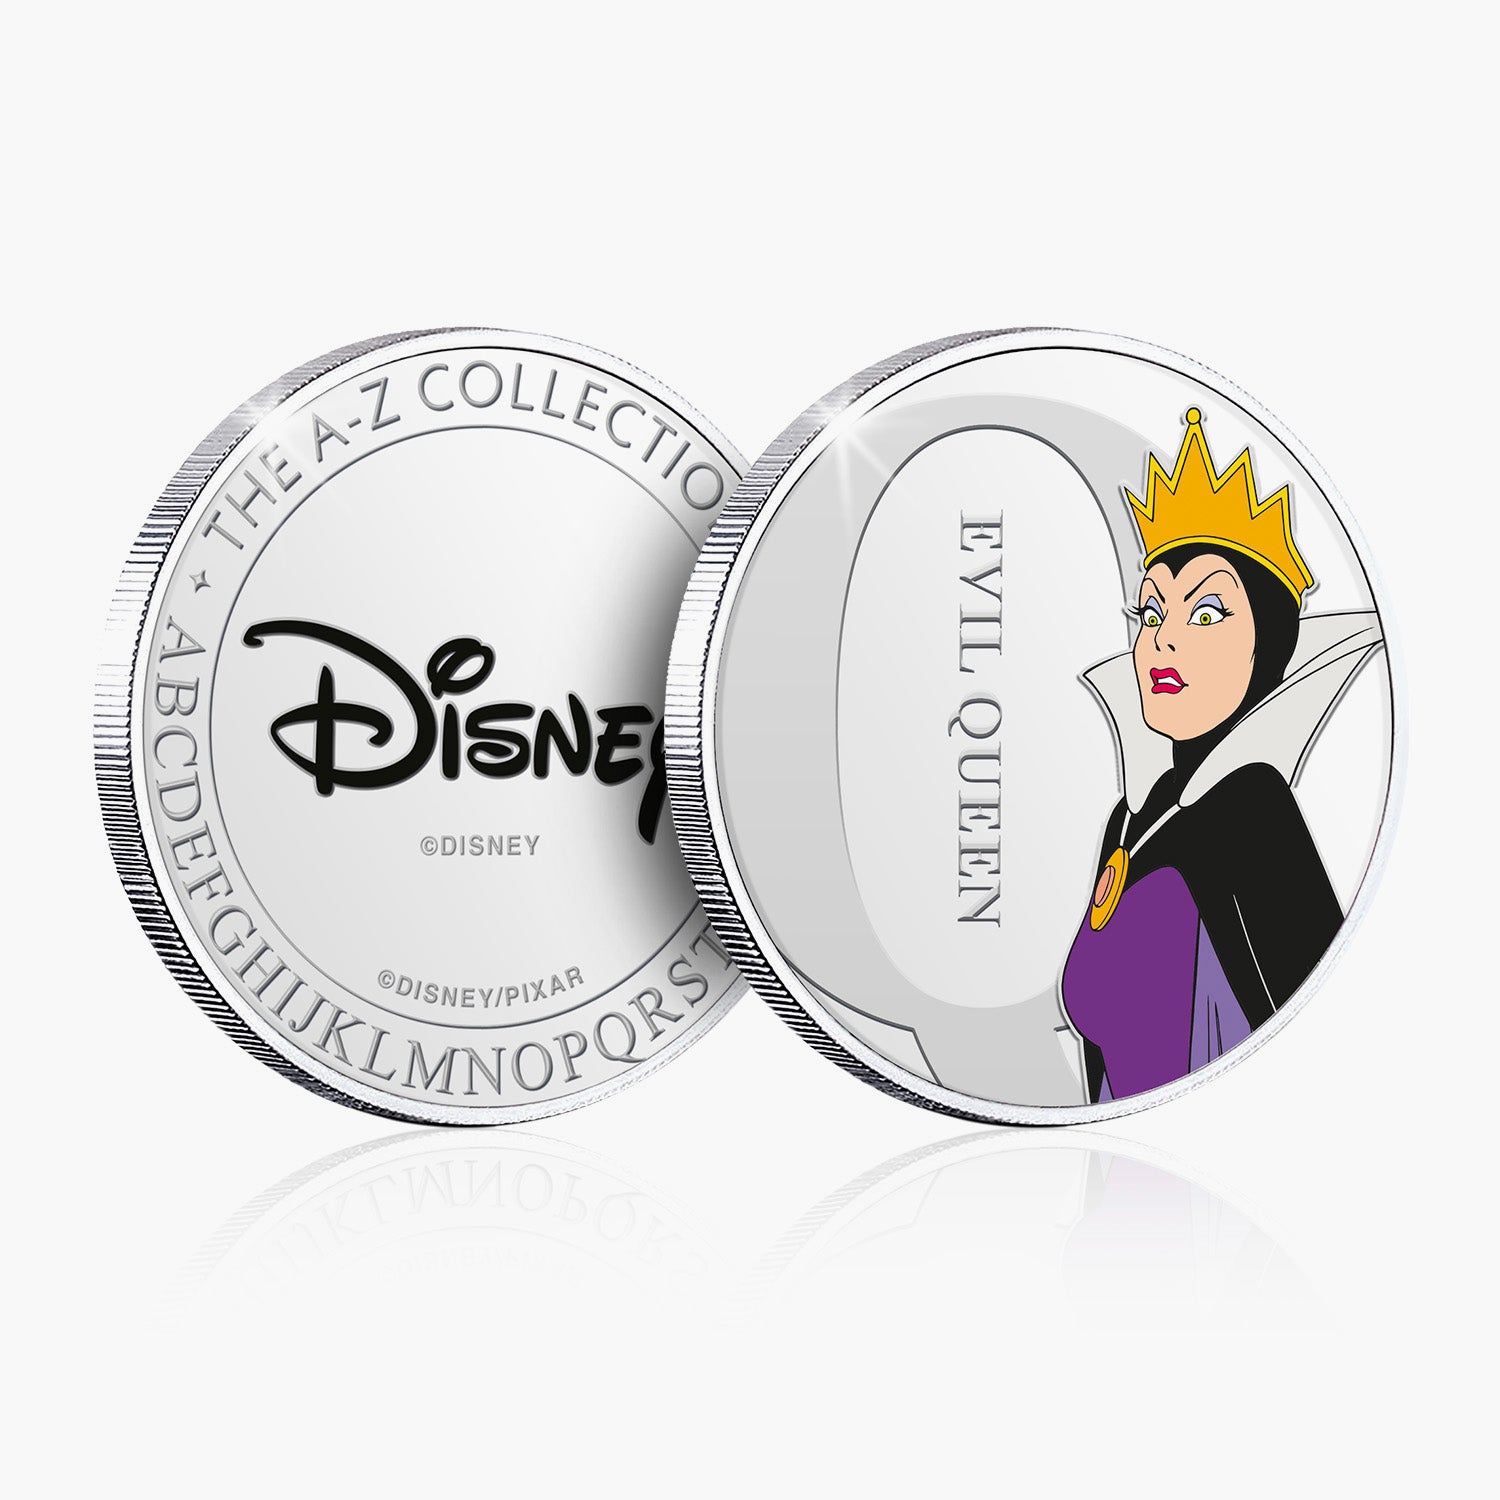 Q is for Evil Queen Silver-Plated Full Colour Commemorative